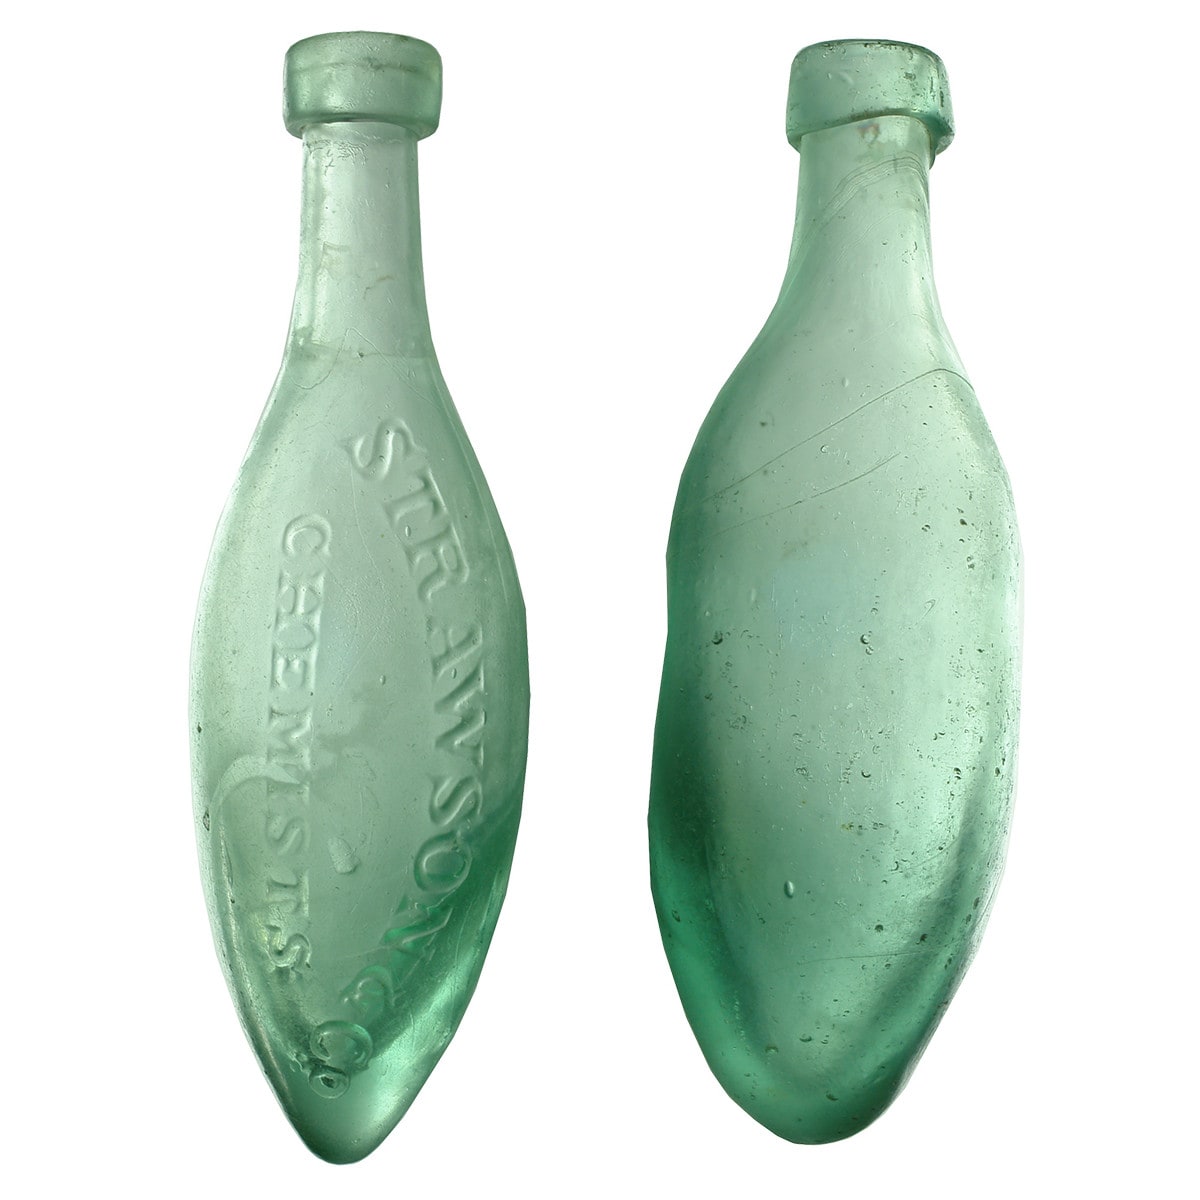 Pair of early Square Collar Torpedos: Strawson & Co., Chemists, Liverpool and a stubby shaped plain one.